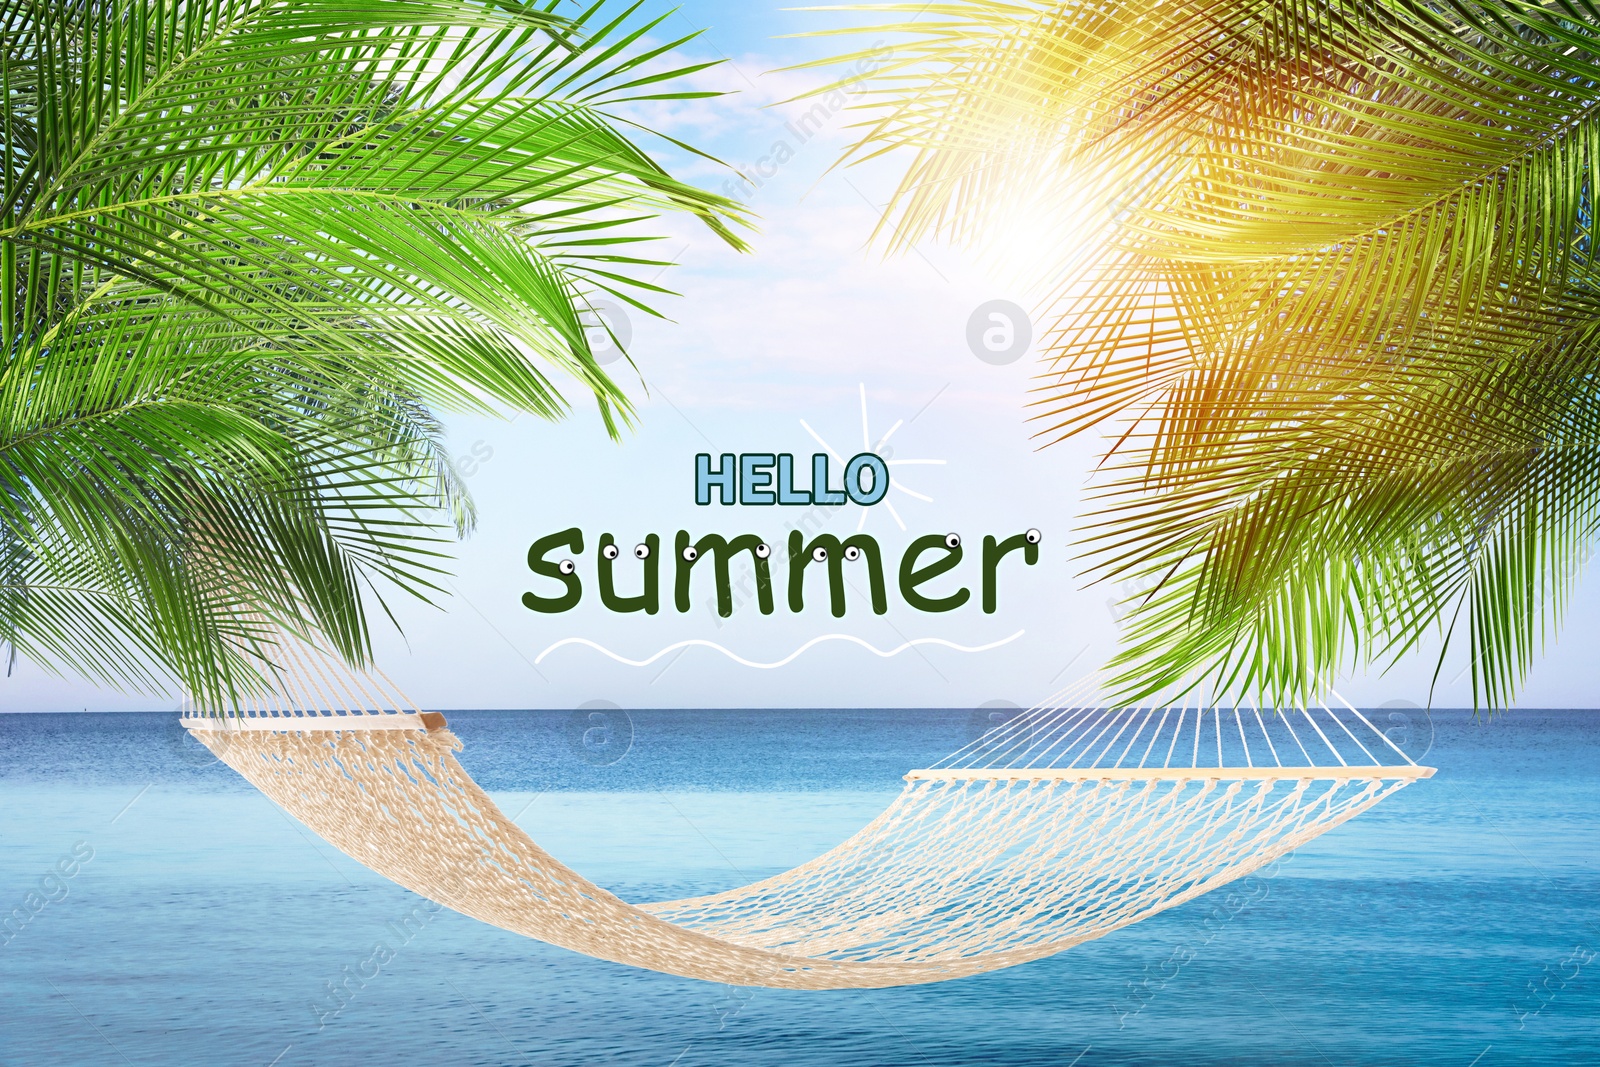 Image of Hello Summer text and hammock between tropical palms on ocean coast